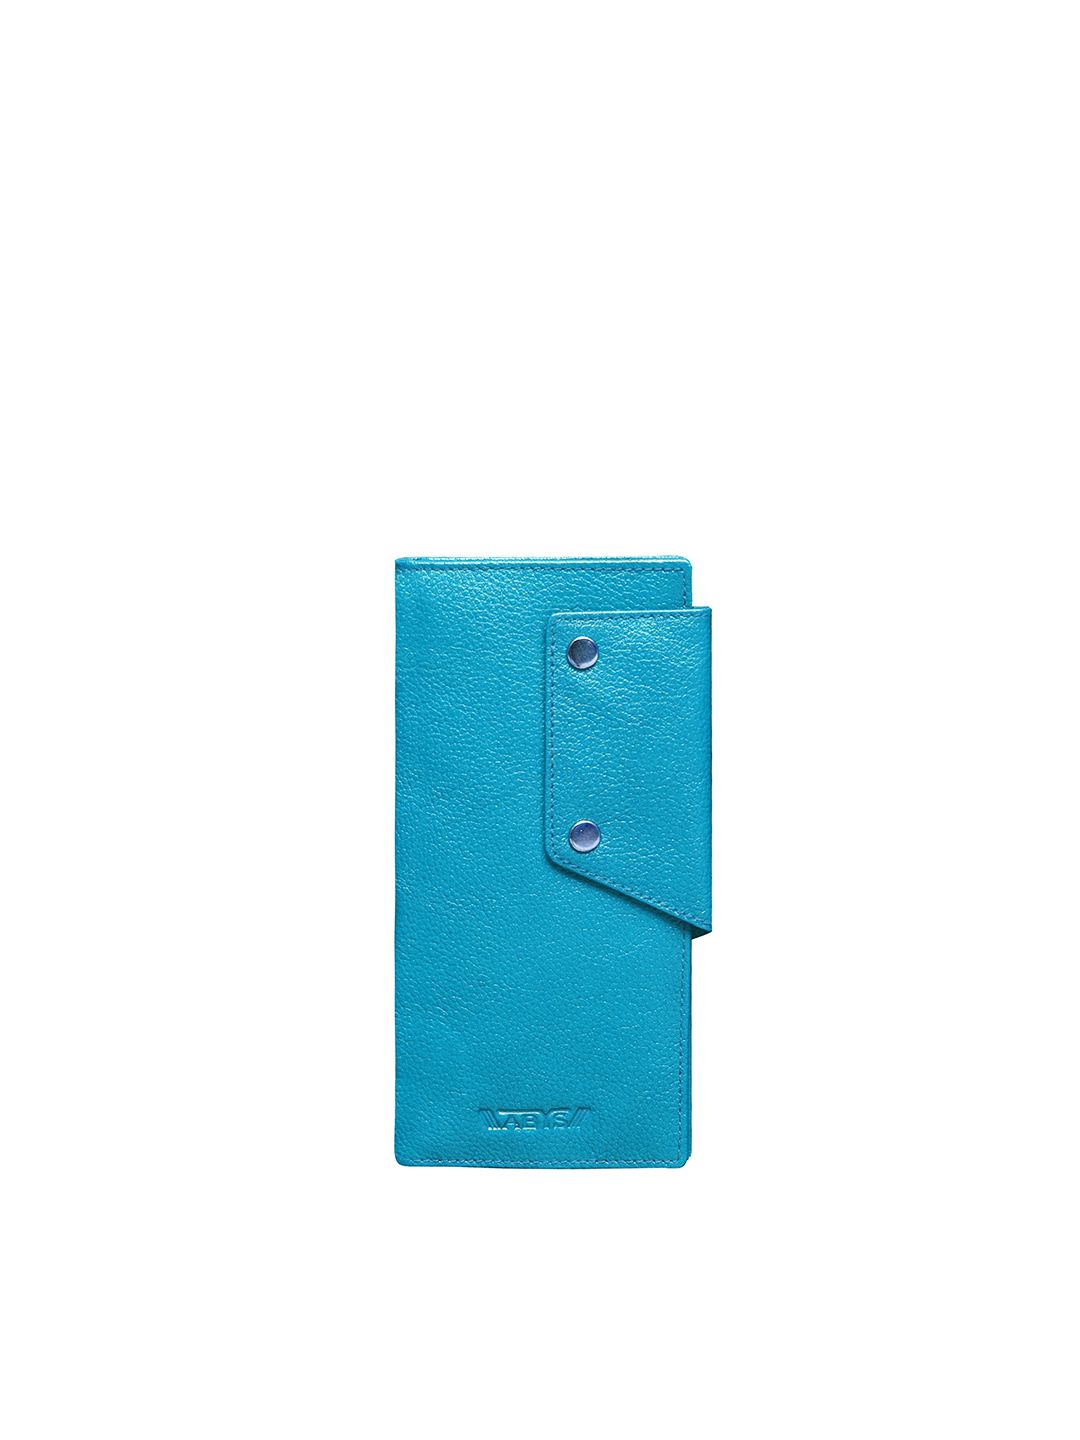 ABYS Unisex Blue Genuine Leather Card Holder Price in India